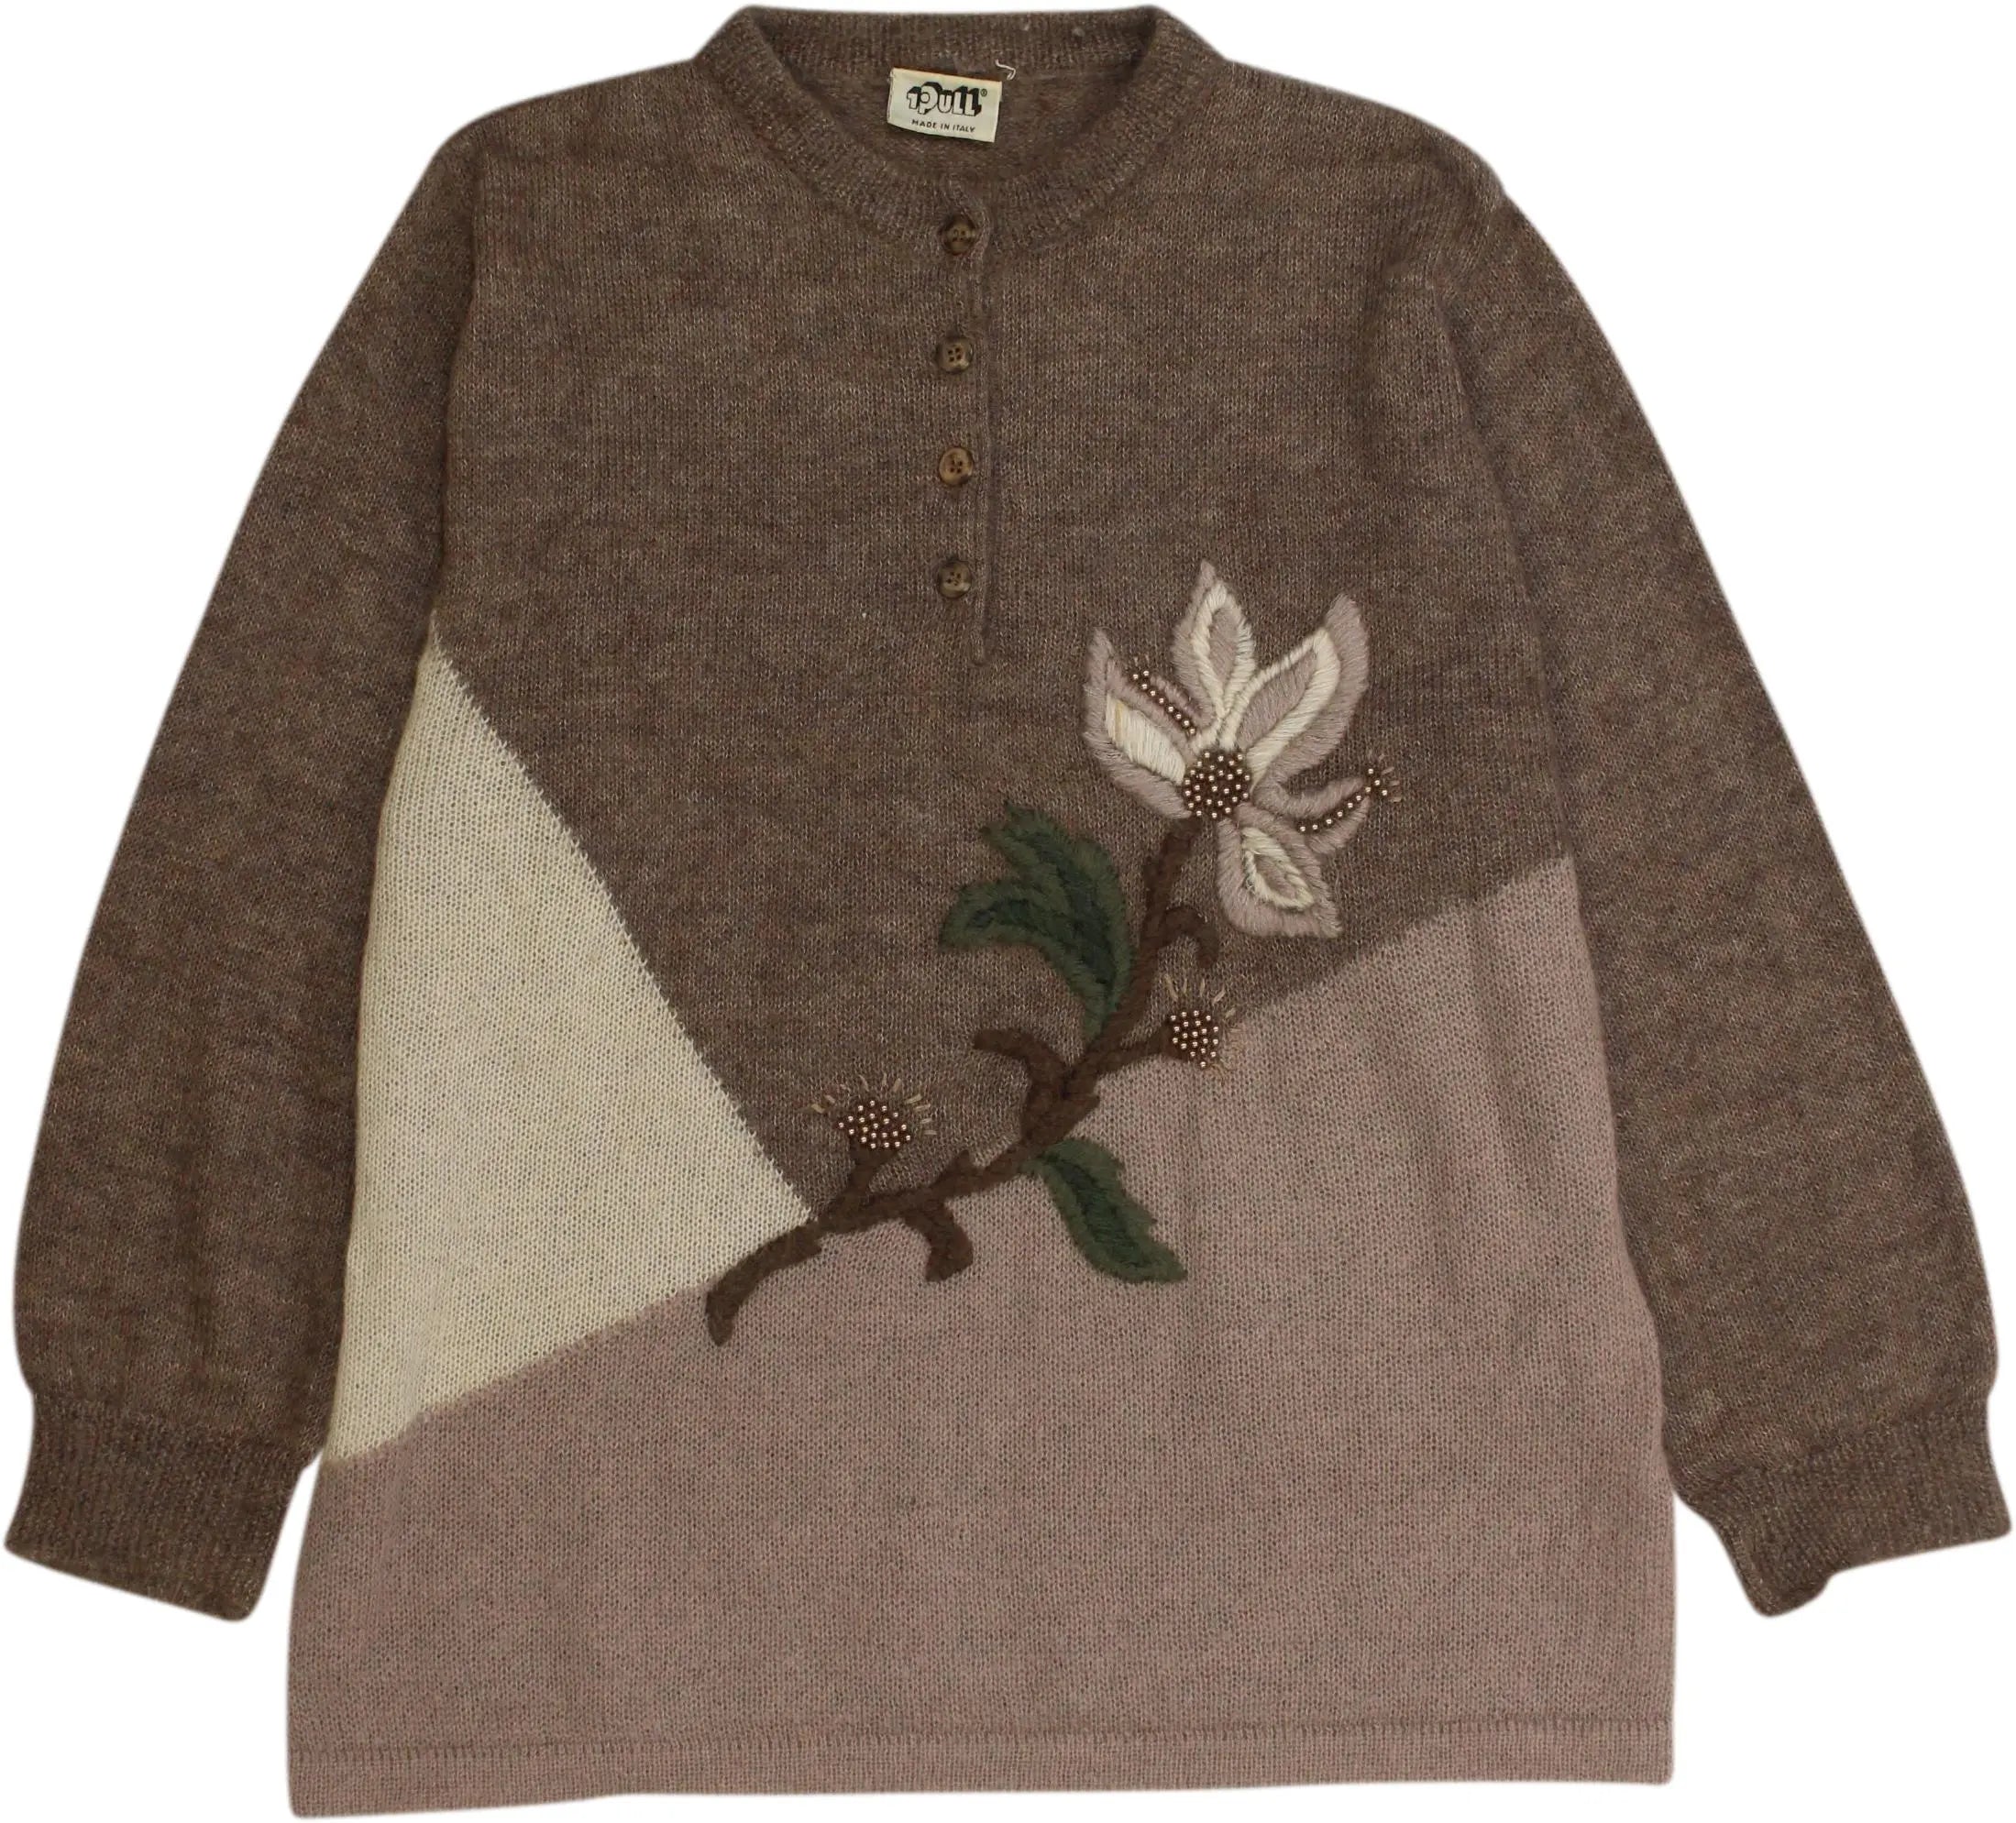 1 Pull - Wool Blend Jumper with Embroidered Flower- ThriftTale.com - Vintage and second handclothing